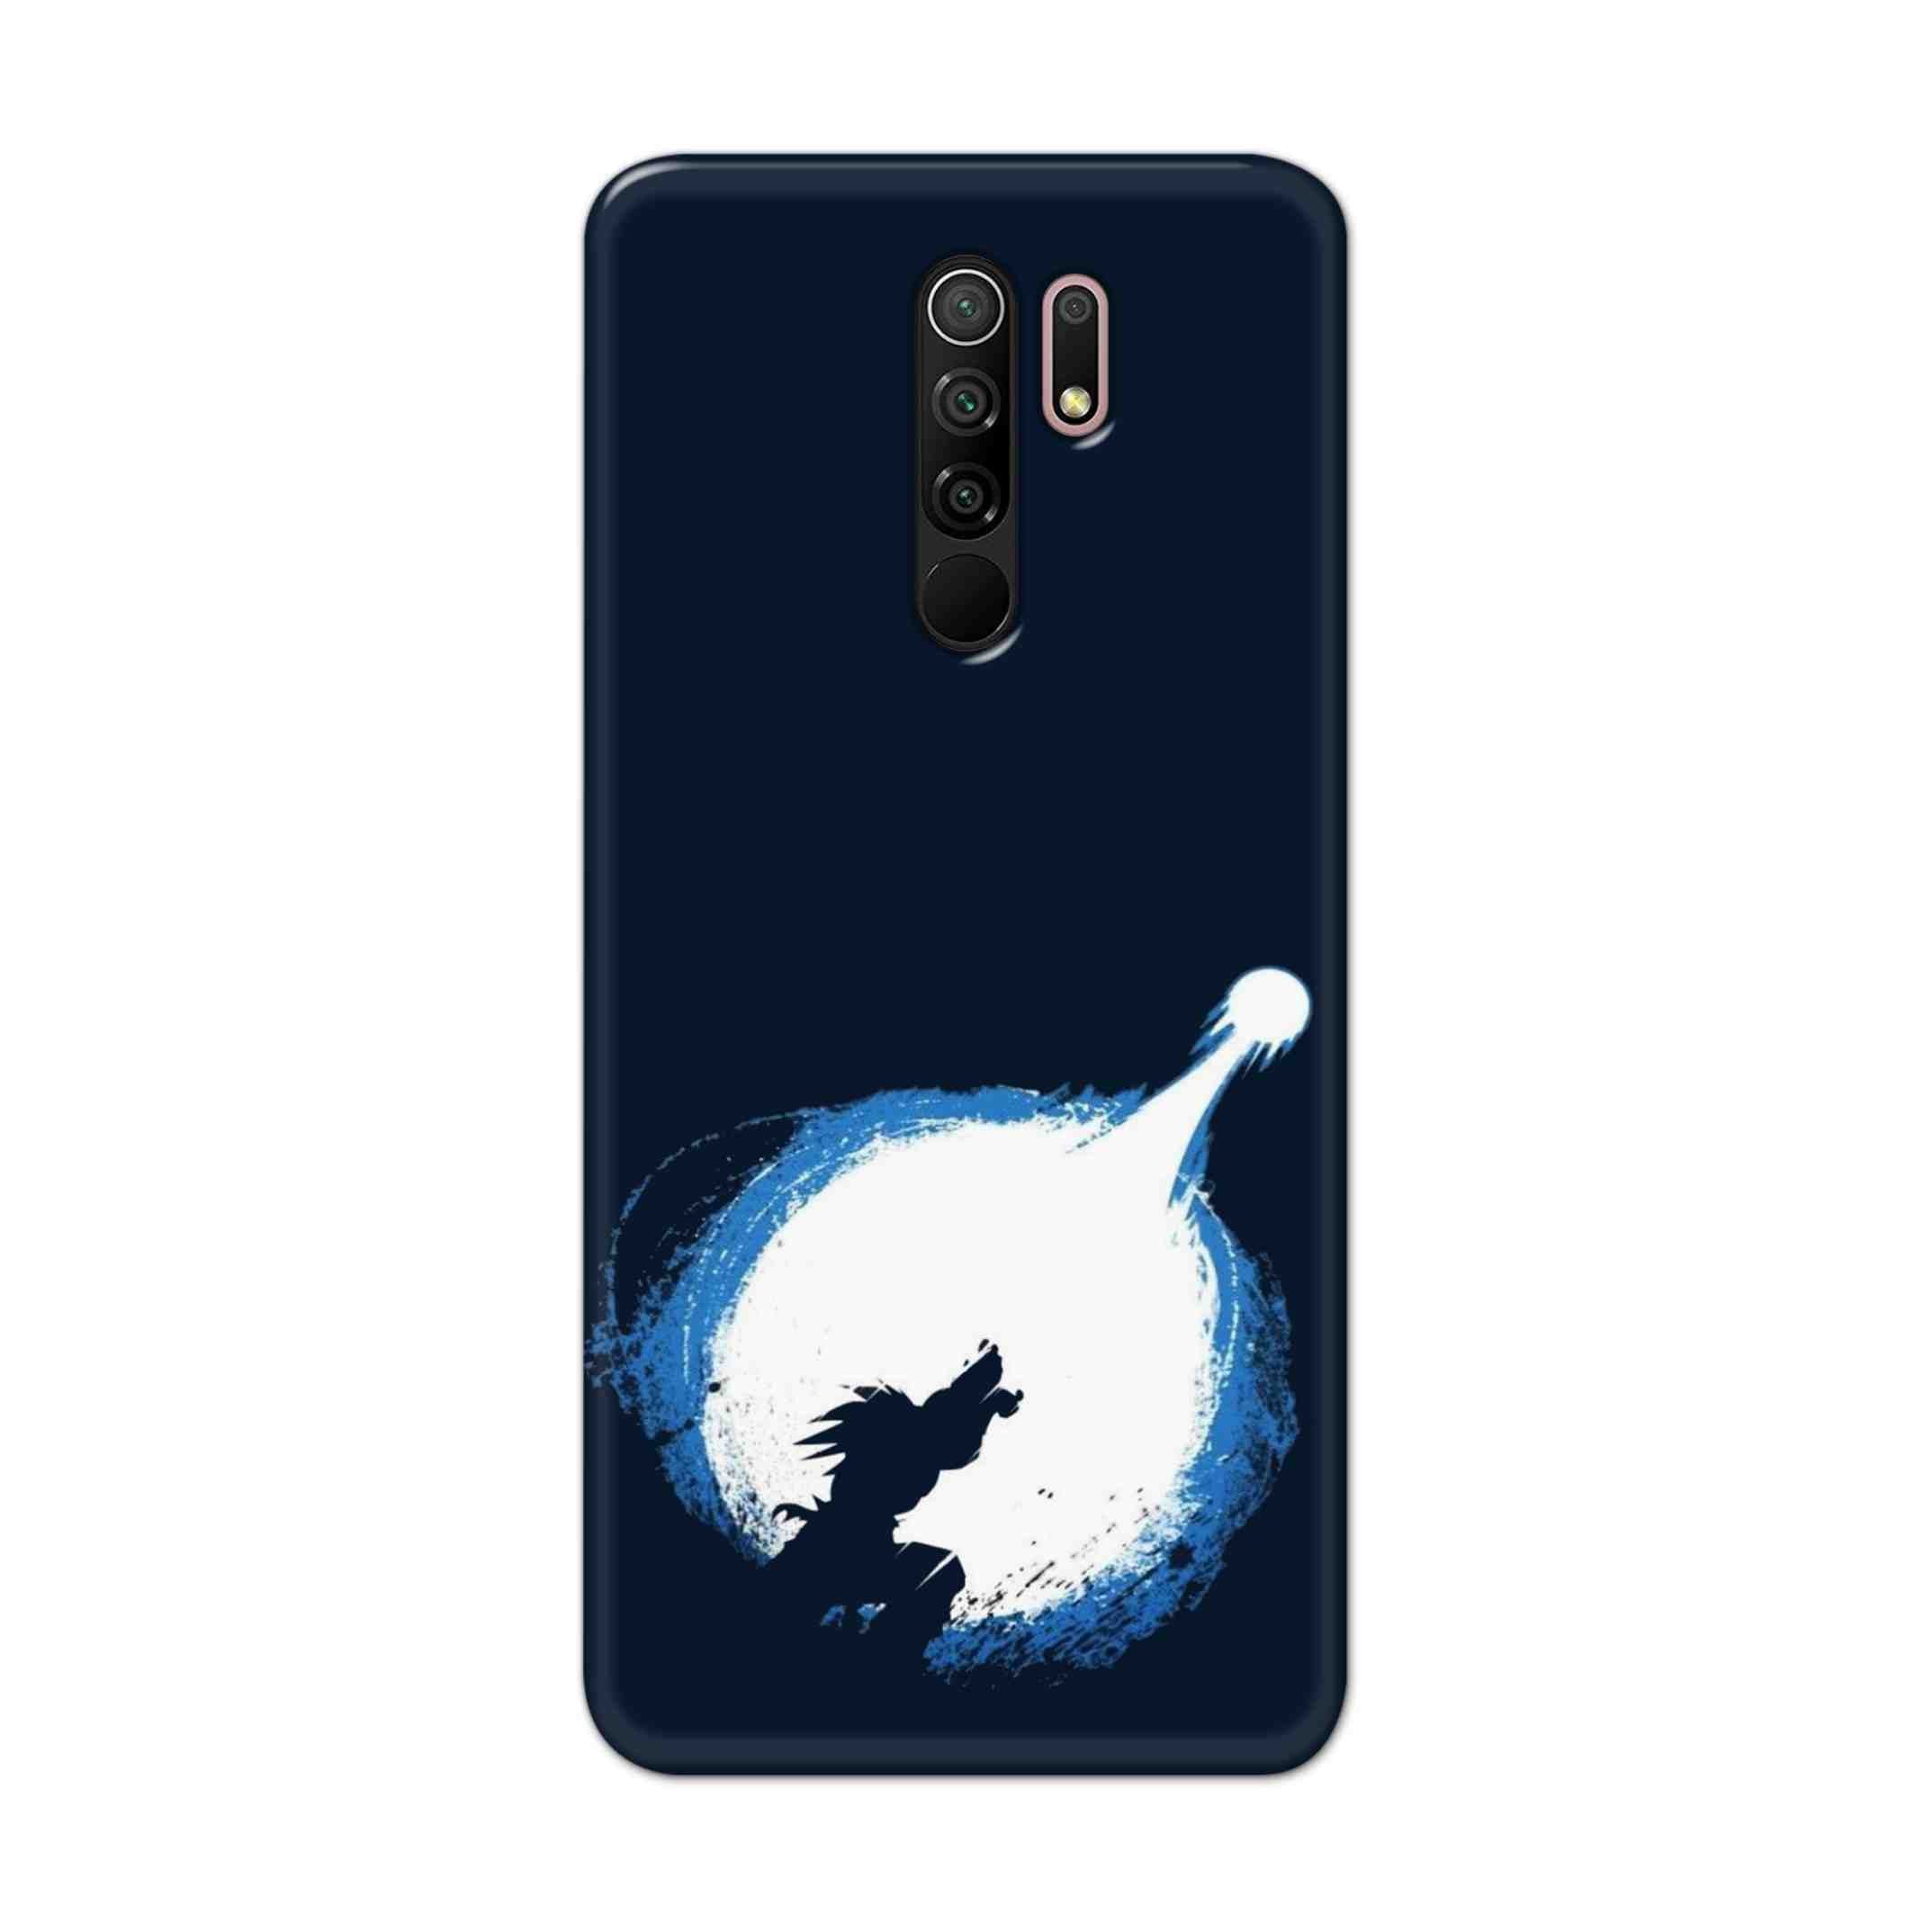 Buy Goku Power Hard Back Mobile Phone Case Cover For Xiaomi Redmi 9 Prime Online